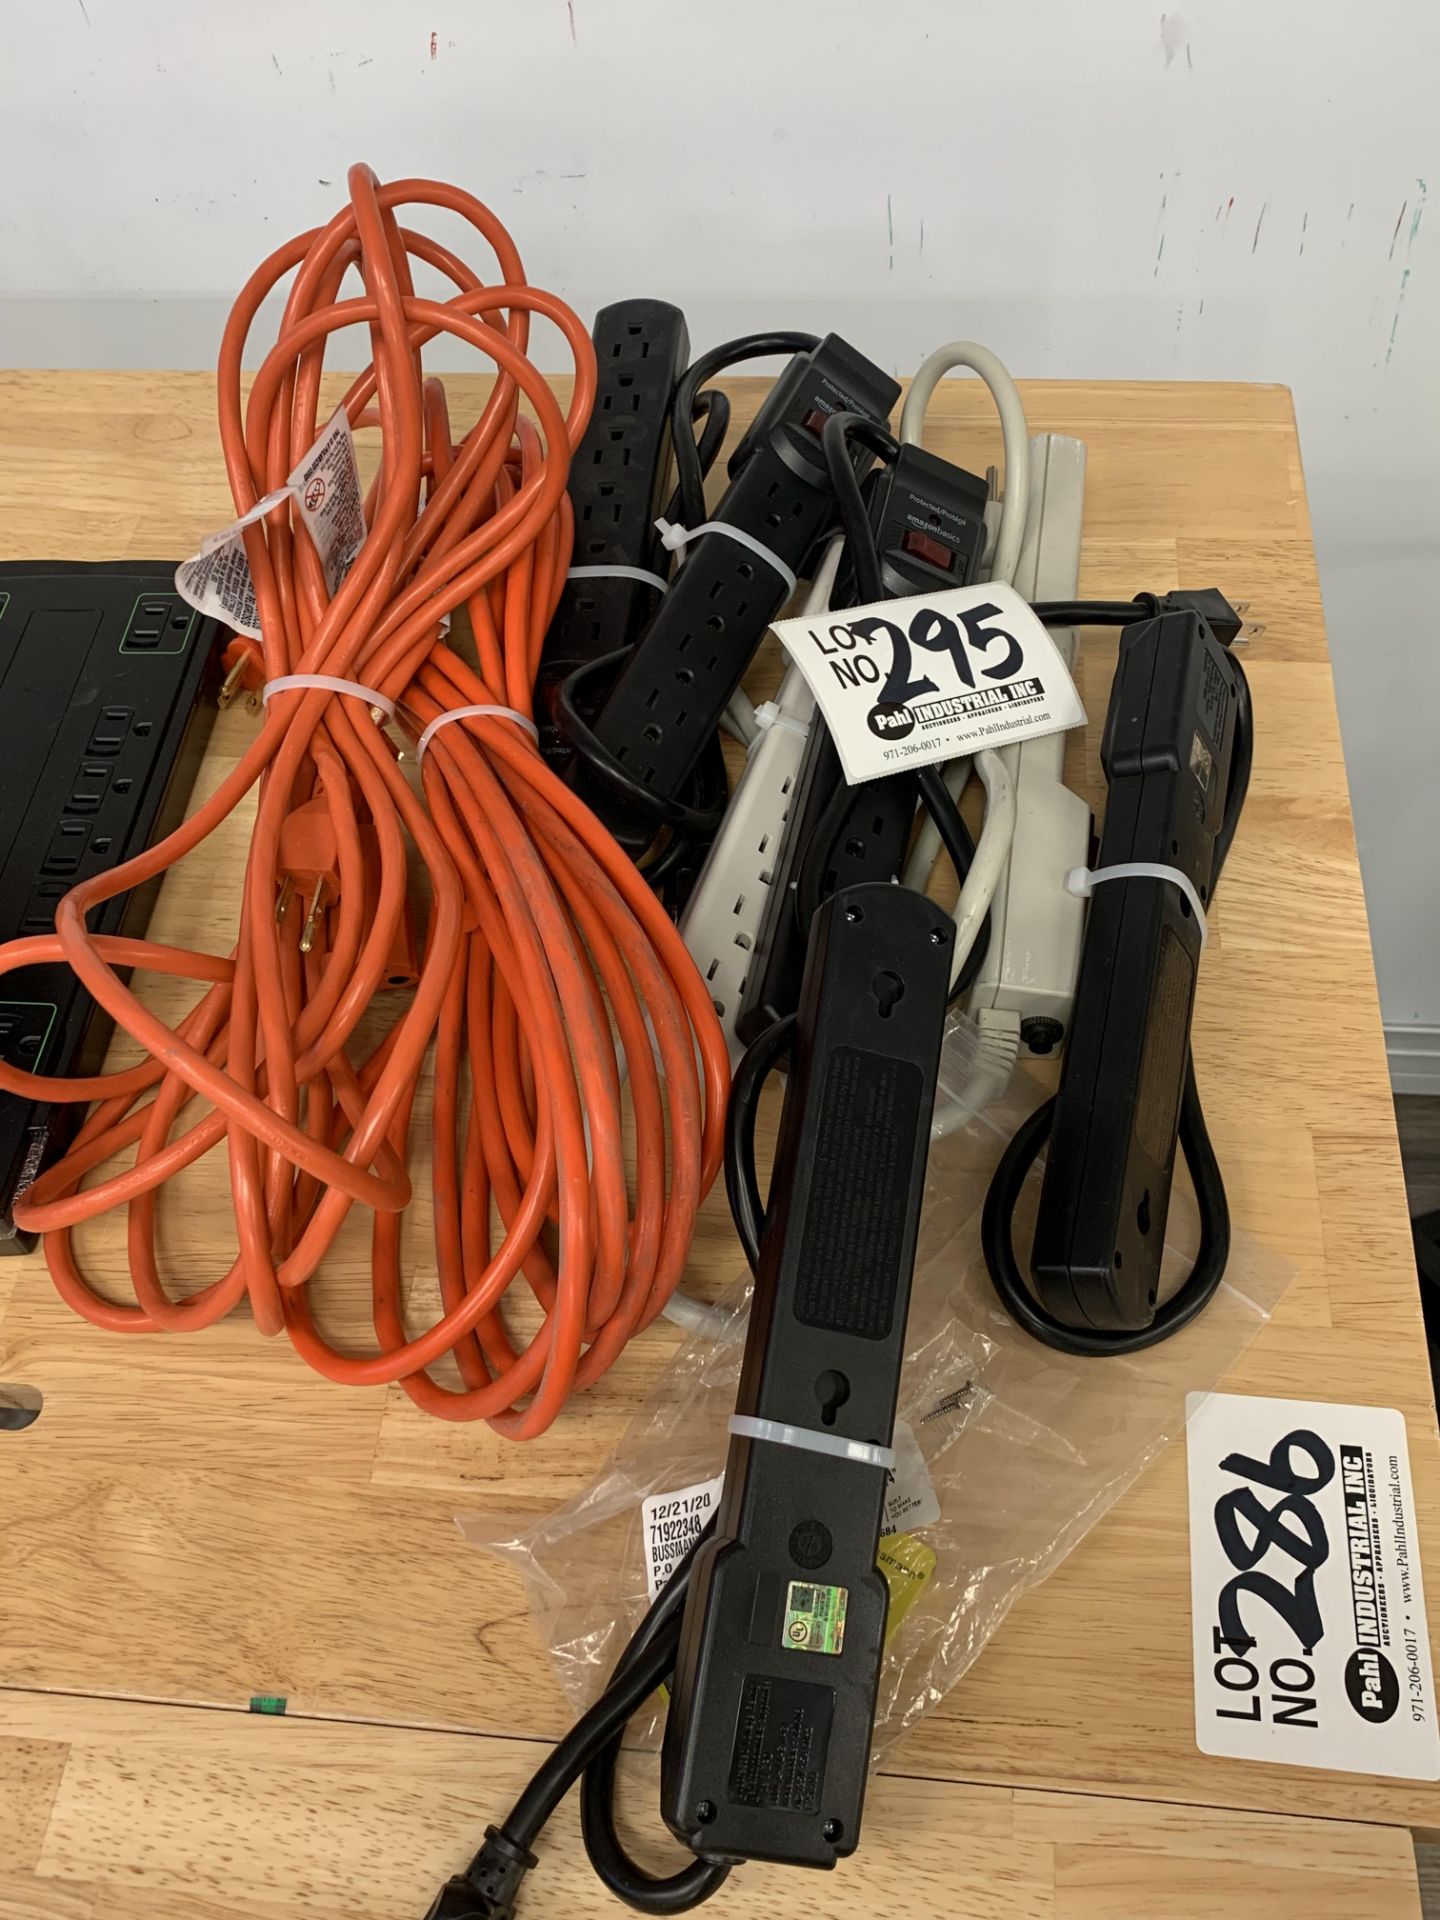 Assorted extension cords and surge protectors